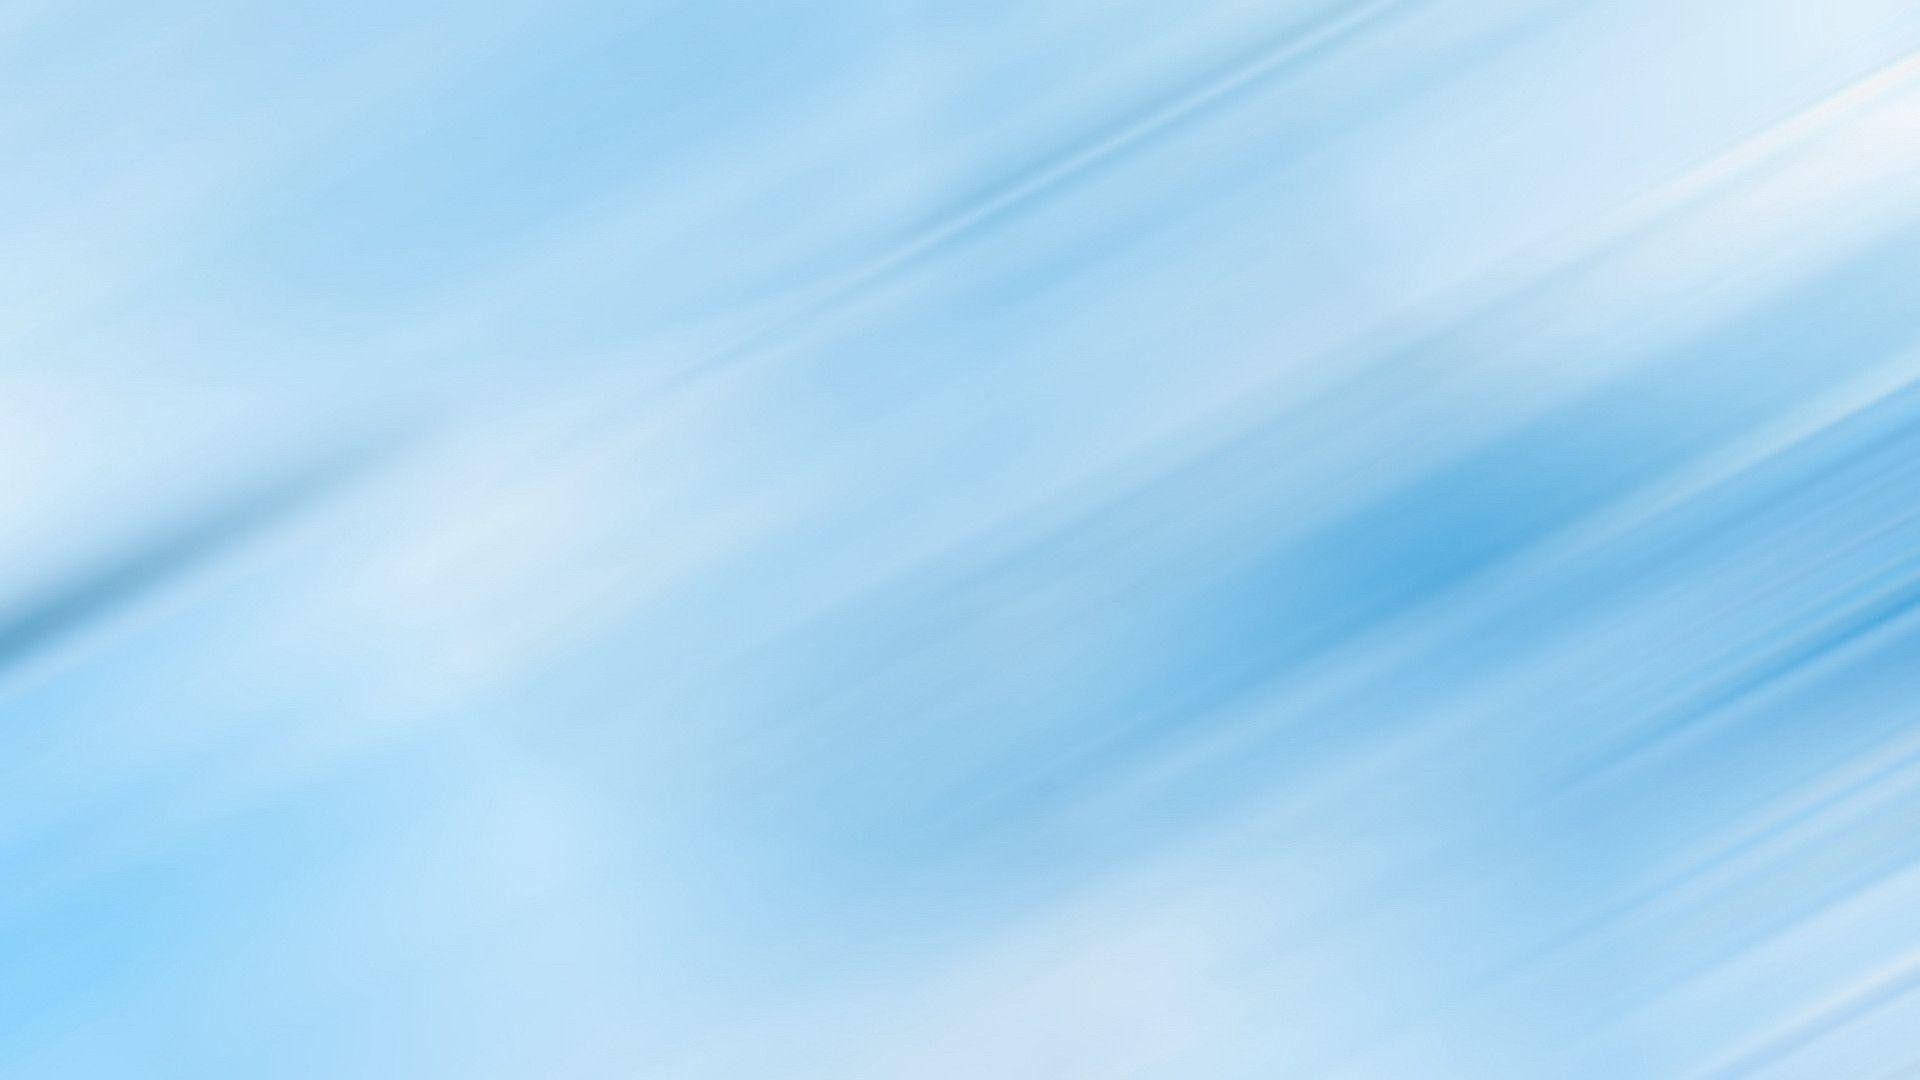 Free Simple Blue Aesthetic Wallpaper Downloads, [100+] Simple Blue  Aesthetic Wallpapers for FREE 